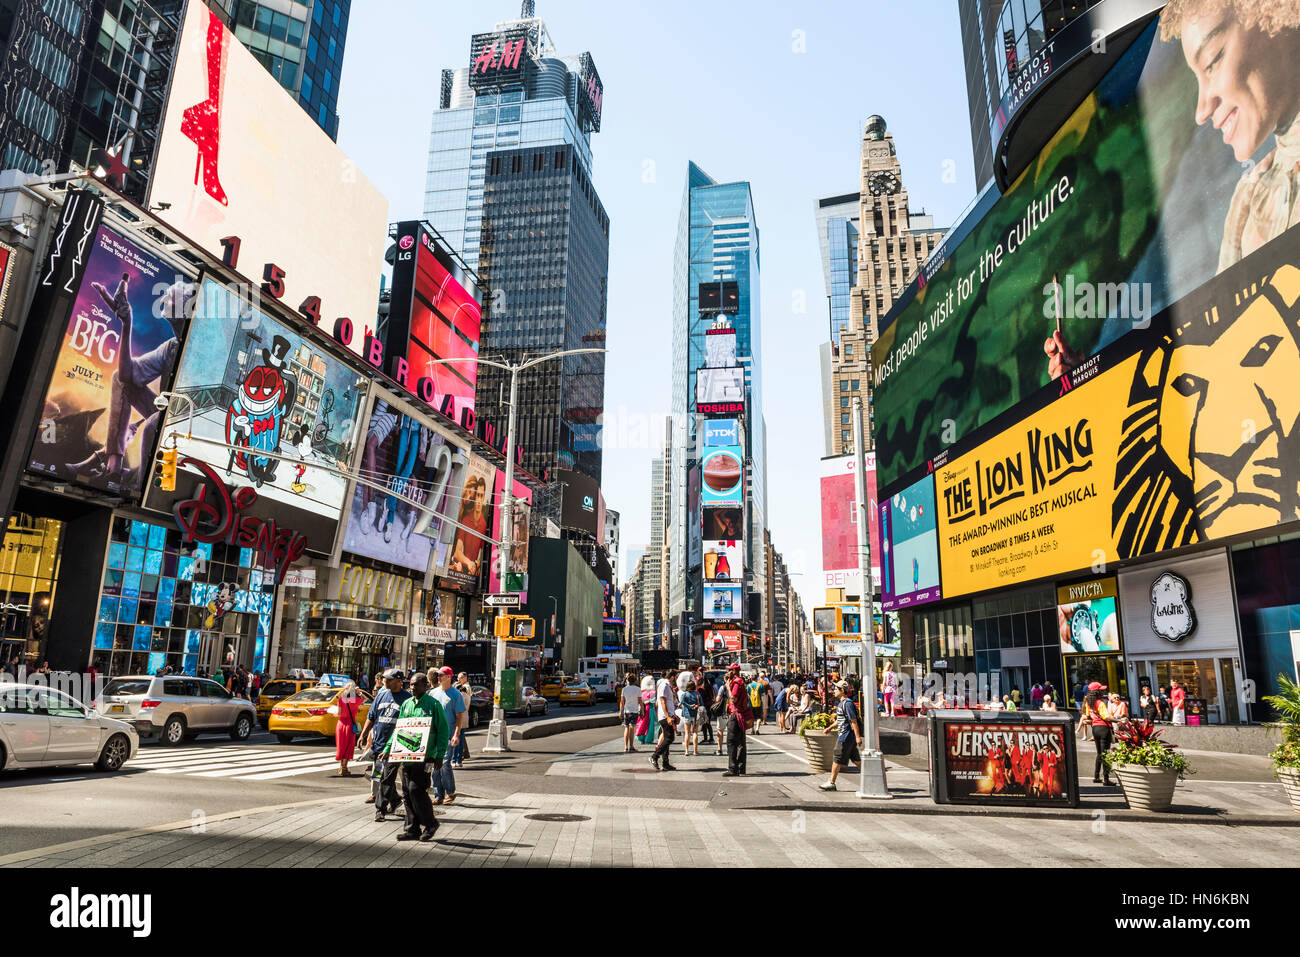 New York, USA - June 18, 2016: Times Square during the day with advertisements for the Lion King musical and stores such as Forever 21 and H&M Stock Photo